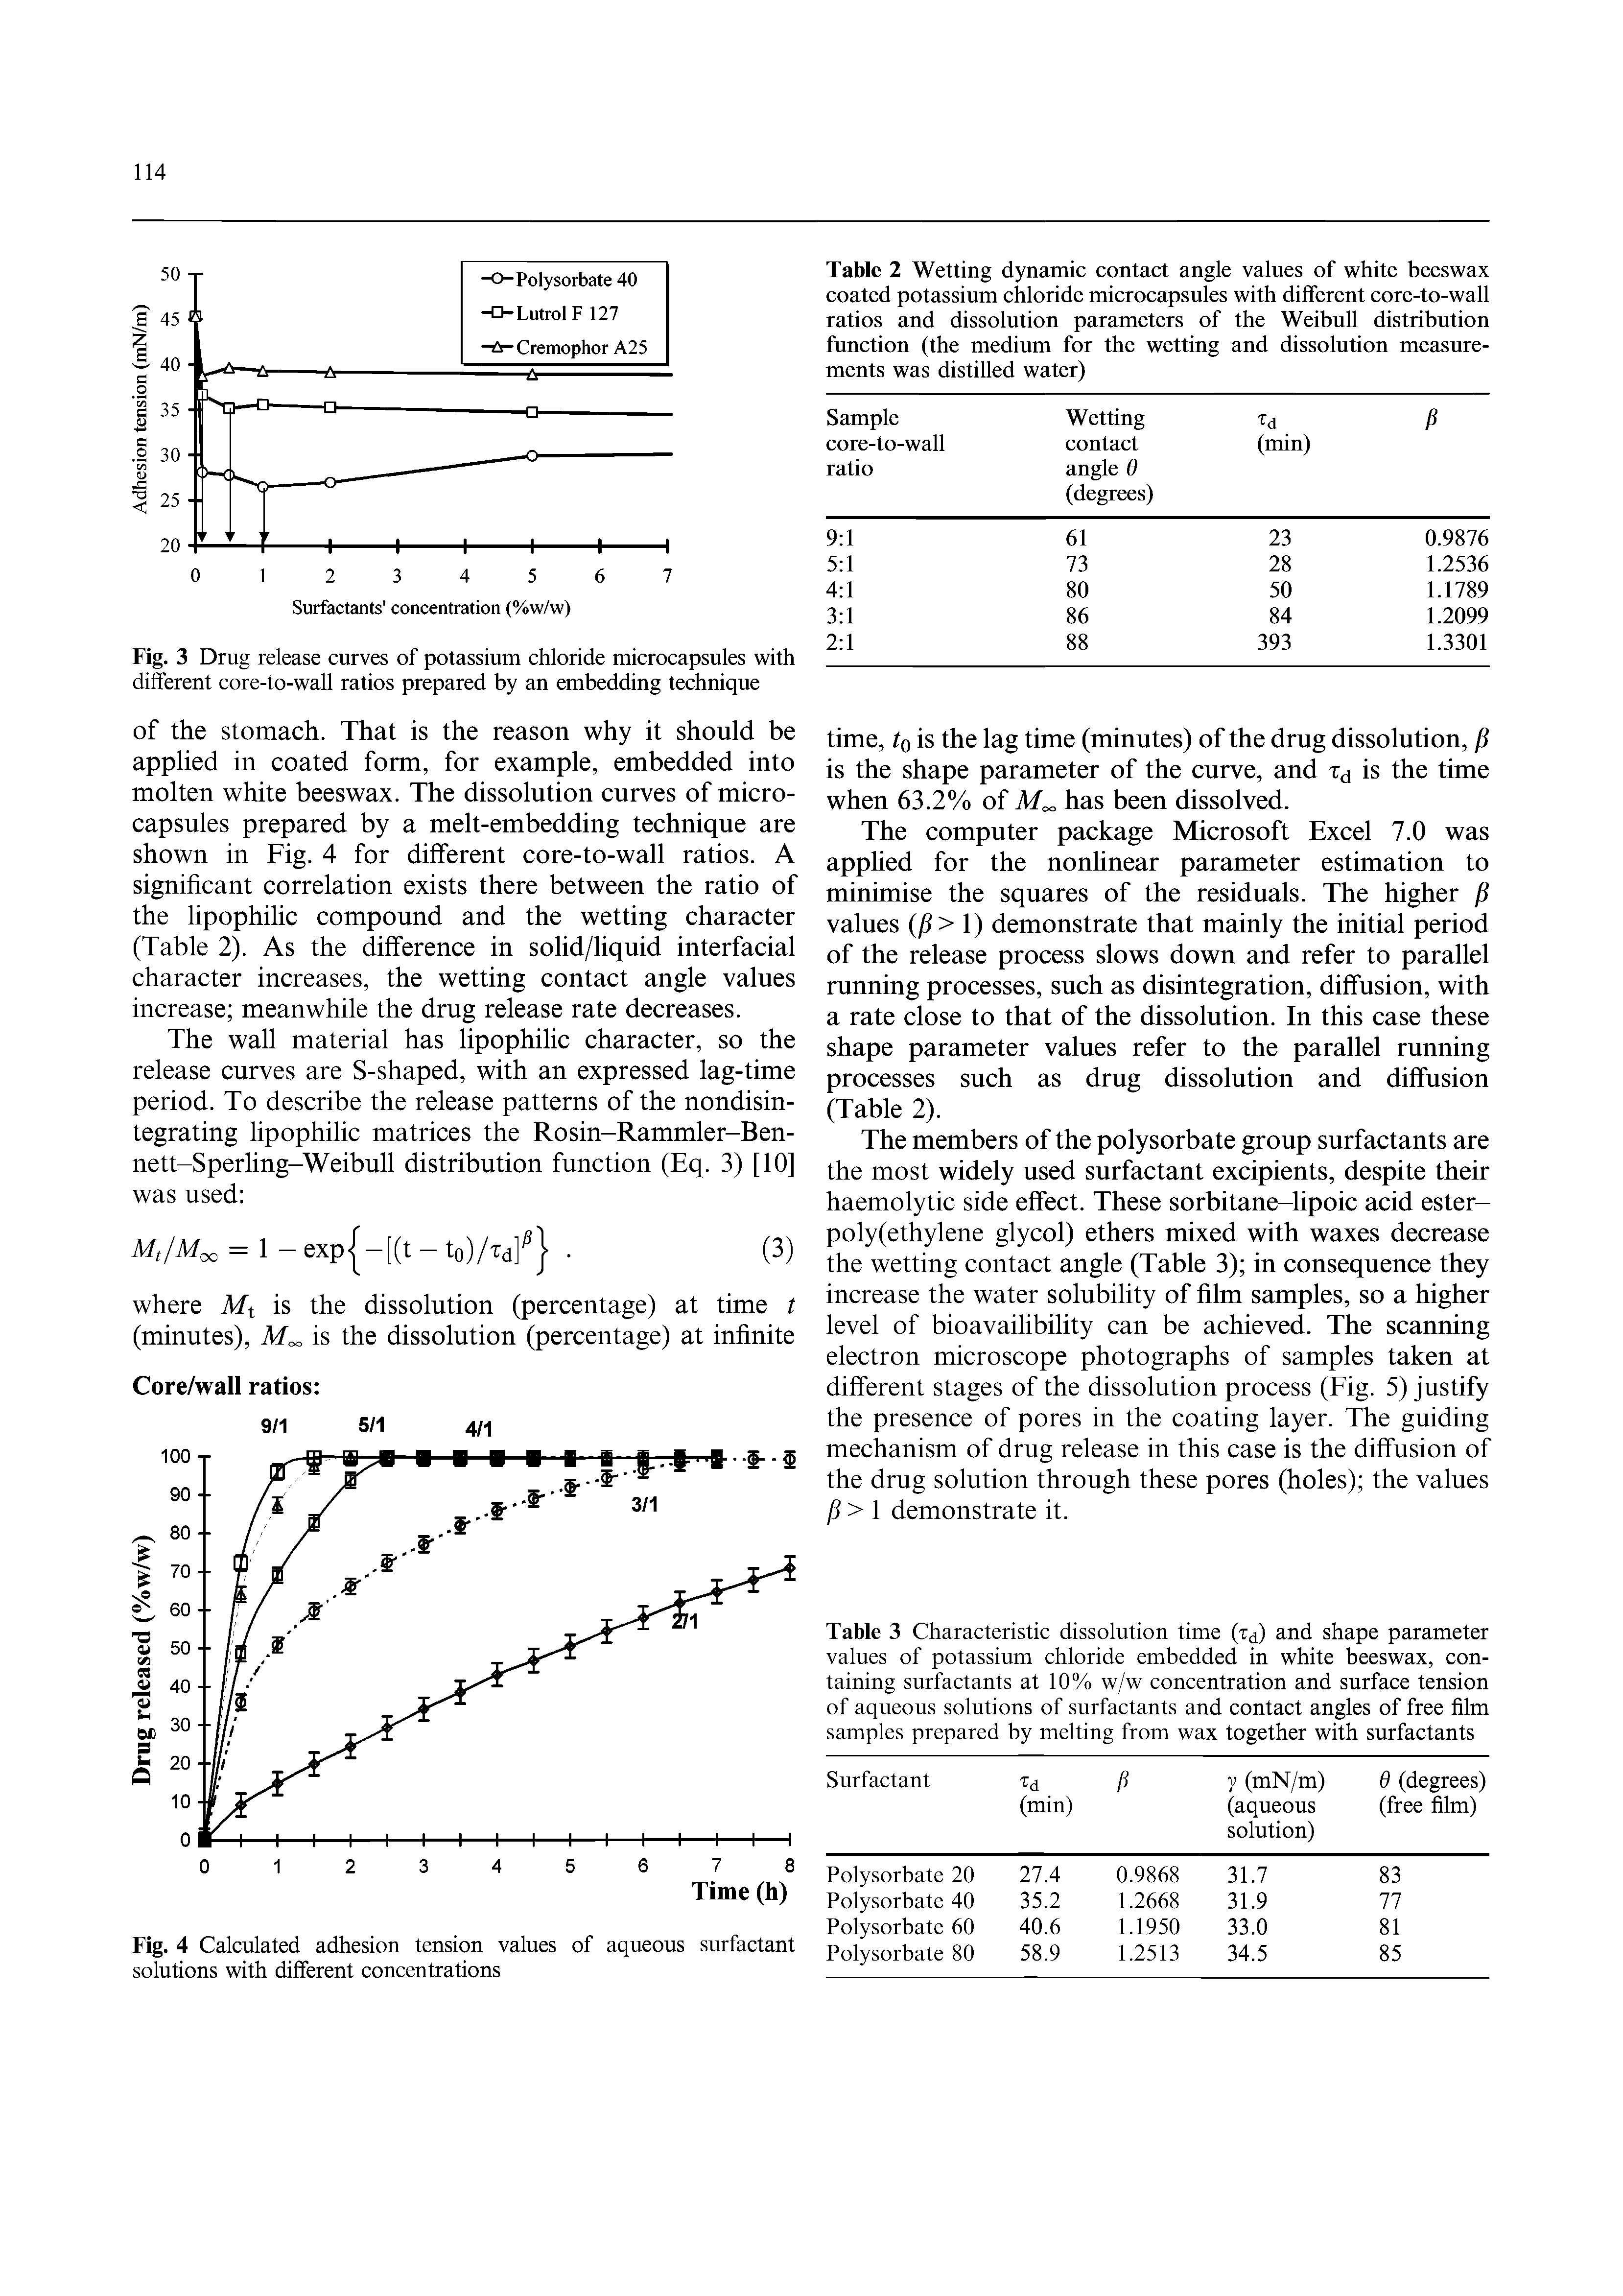 Table 3 Characteristic dissolution time (td) and shape parameter values of potassium chloride embedded in white beeswax, containing surfactants at 10% w/w concentration and surface tension of aqueous solutions of surfactants and contact angles of free film samples prepared by melting from wax together with surfactants...